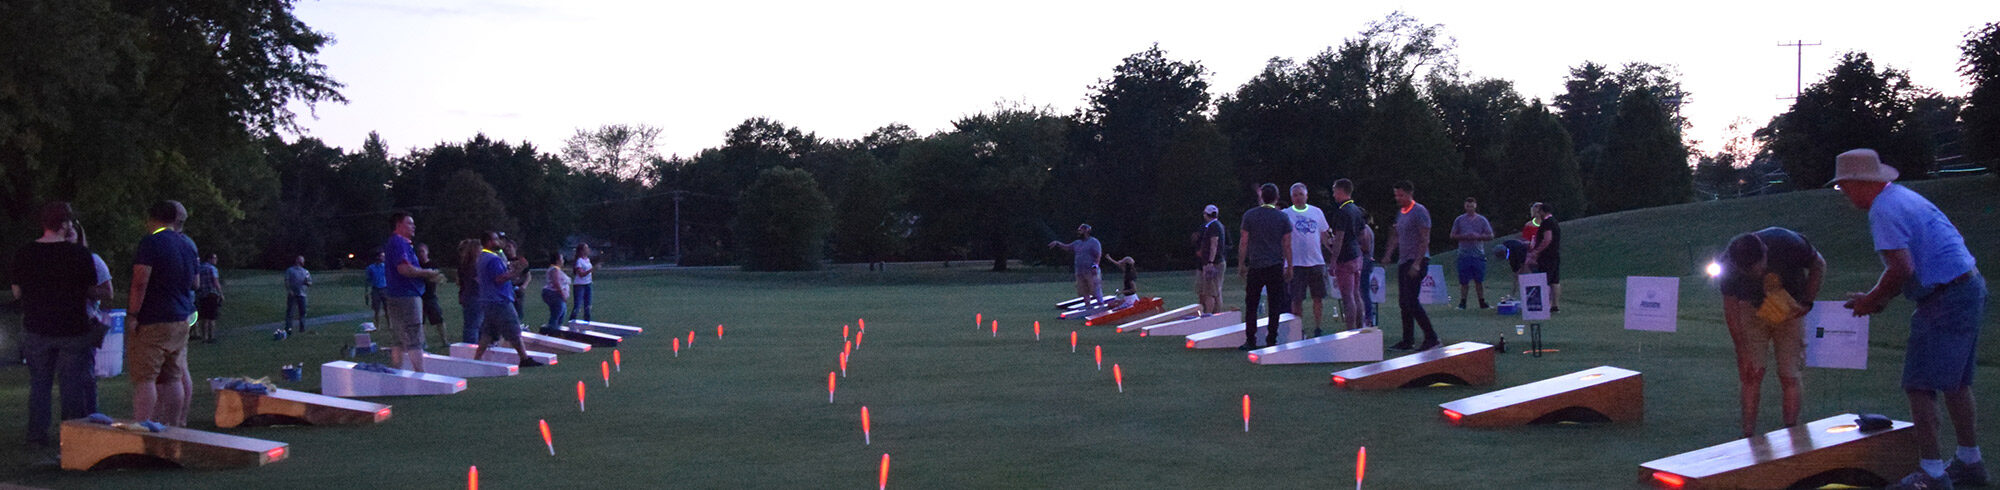 people playing bags at night with glow stick illumination